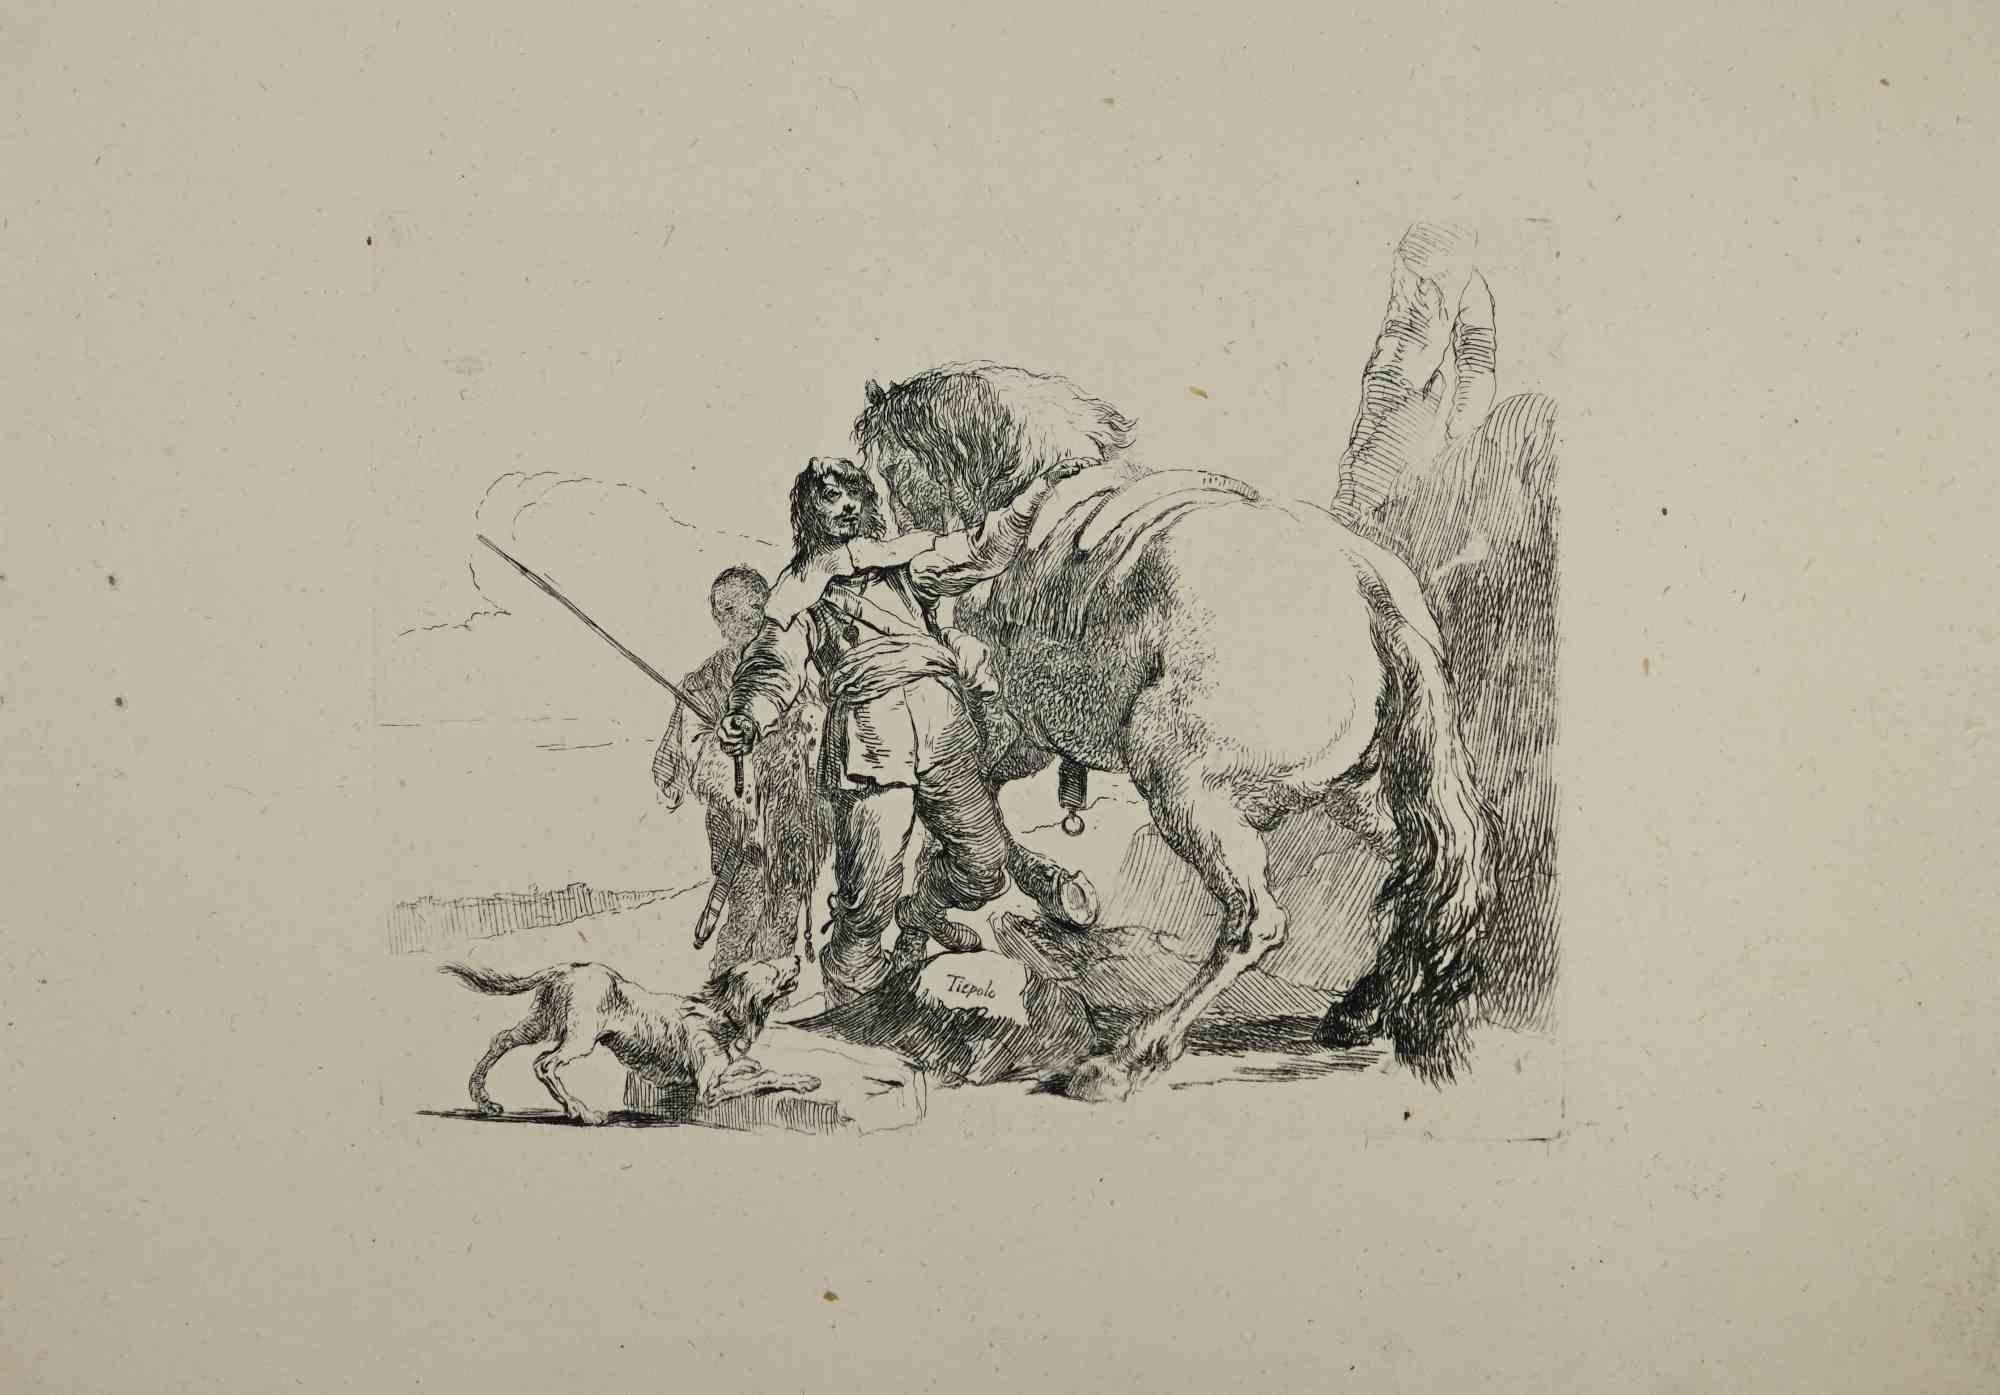 Giovanni Battista Tiepolo Figurative Print - The Knight and his Horse - Etching by G.B. Tiepolo - 1785